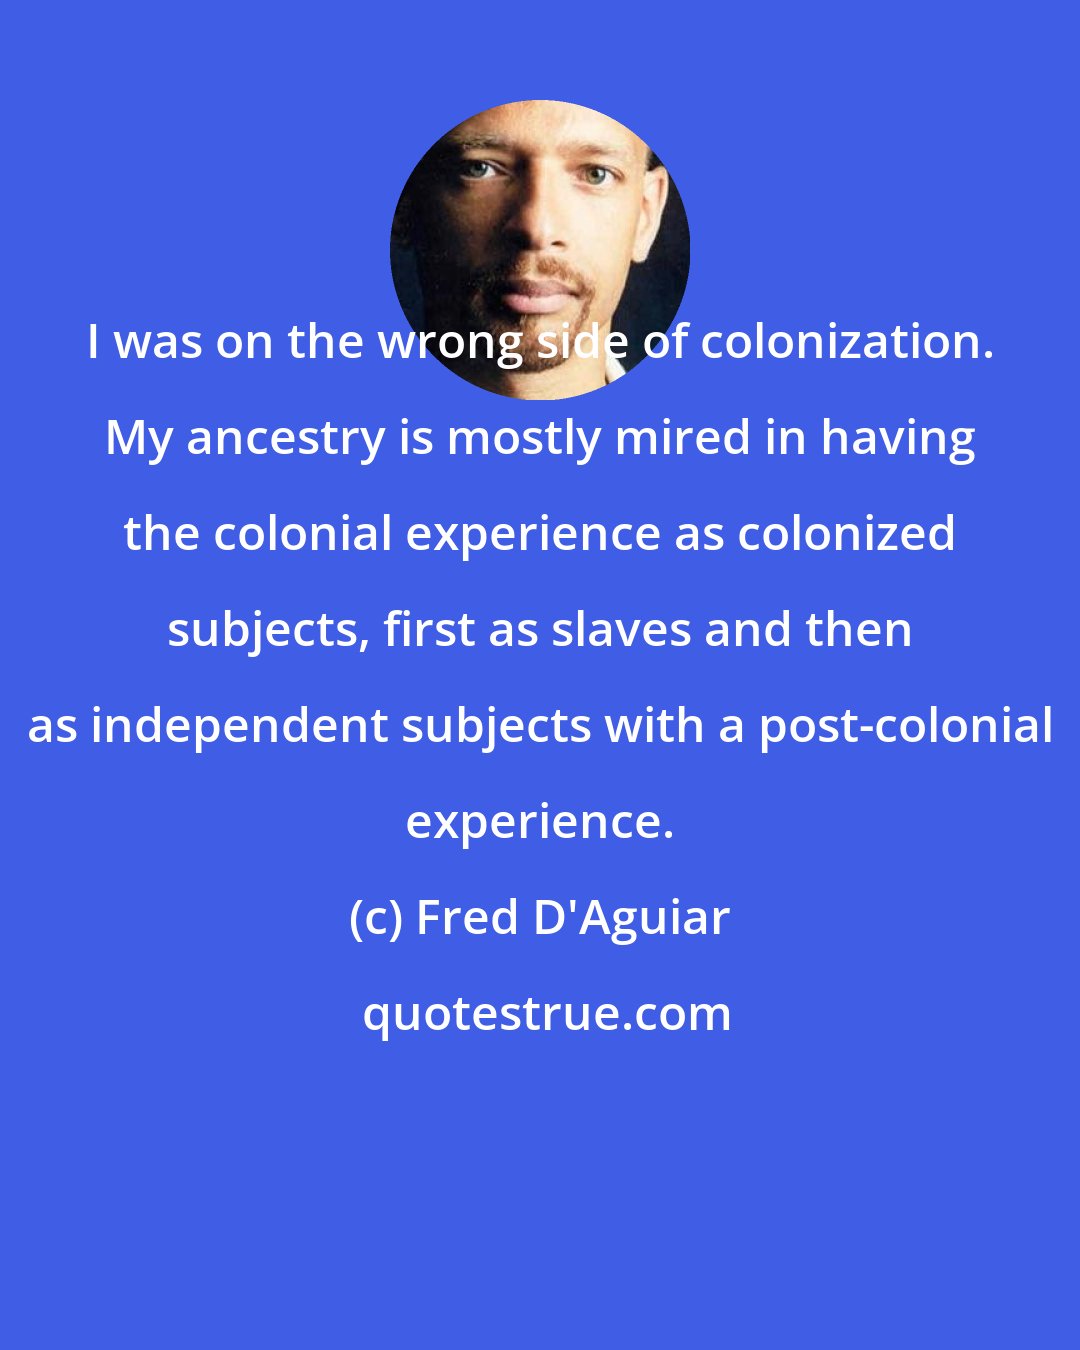 Fred D'Aguiar: I was on the wrong side of colonization. My ancestry is mostly mired in having the colonial experience as colonized subjects, first as slaves and then as independent subjects with a post-colonial experience.